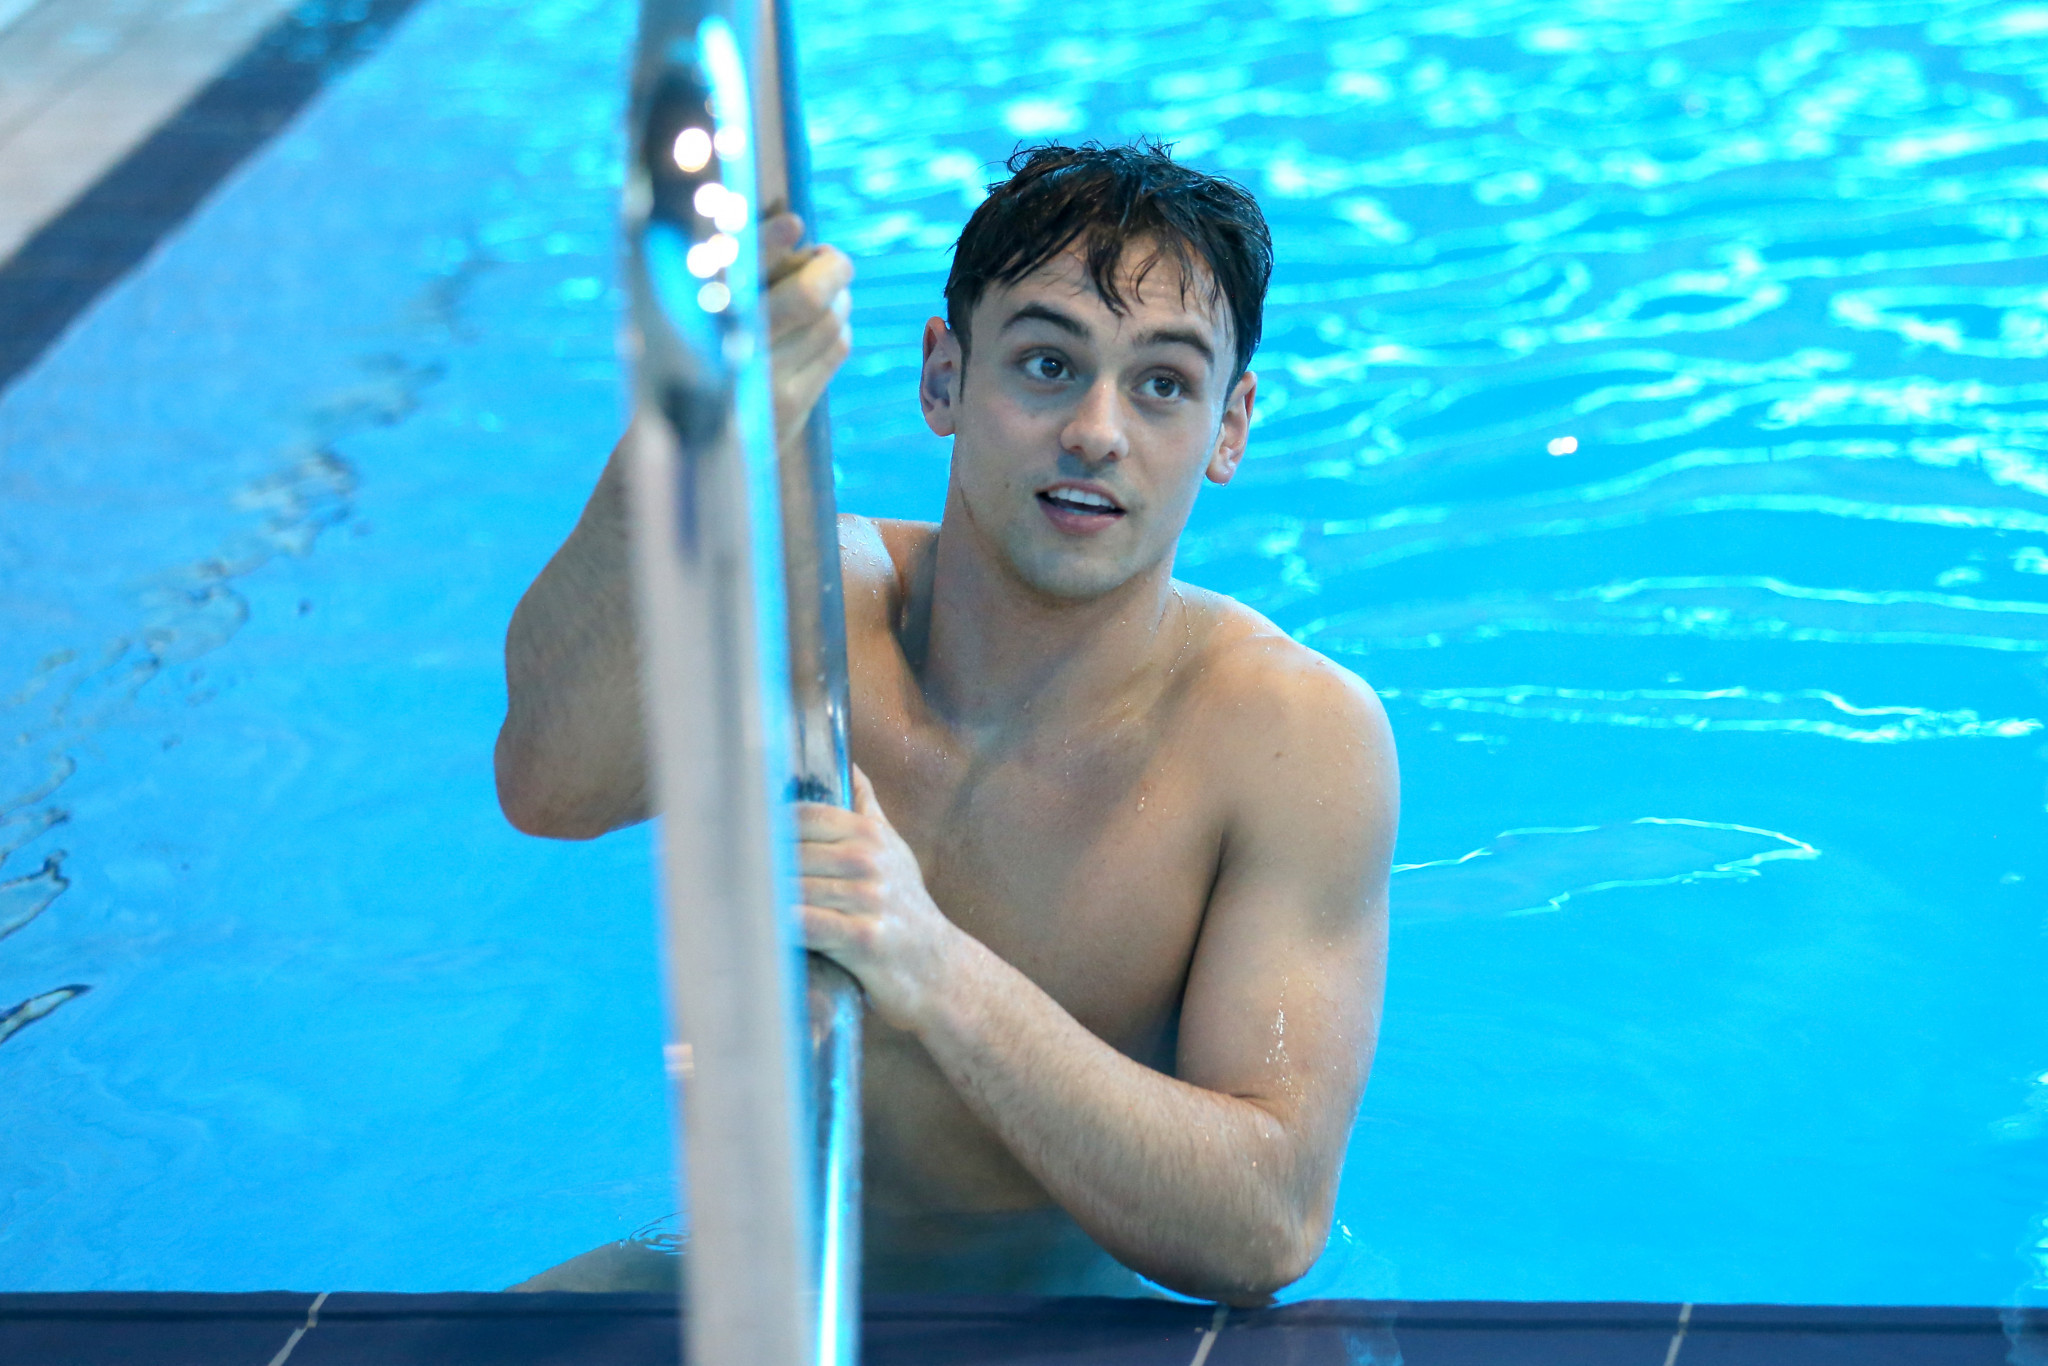 Reigning world champion Tom Daley of Great Britain claimed the men's 10 metres platform gold medal on the final day of competition at the FINA Diving World Series event in Montreal ©Getty Images